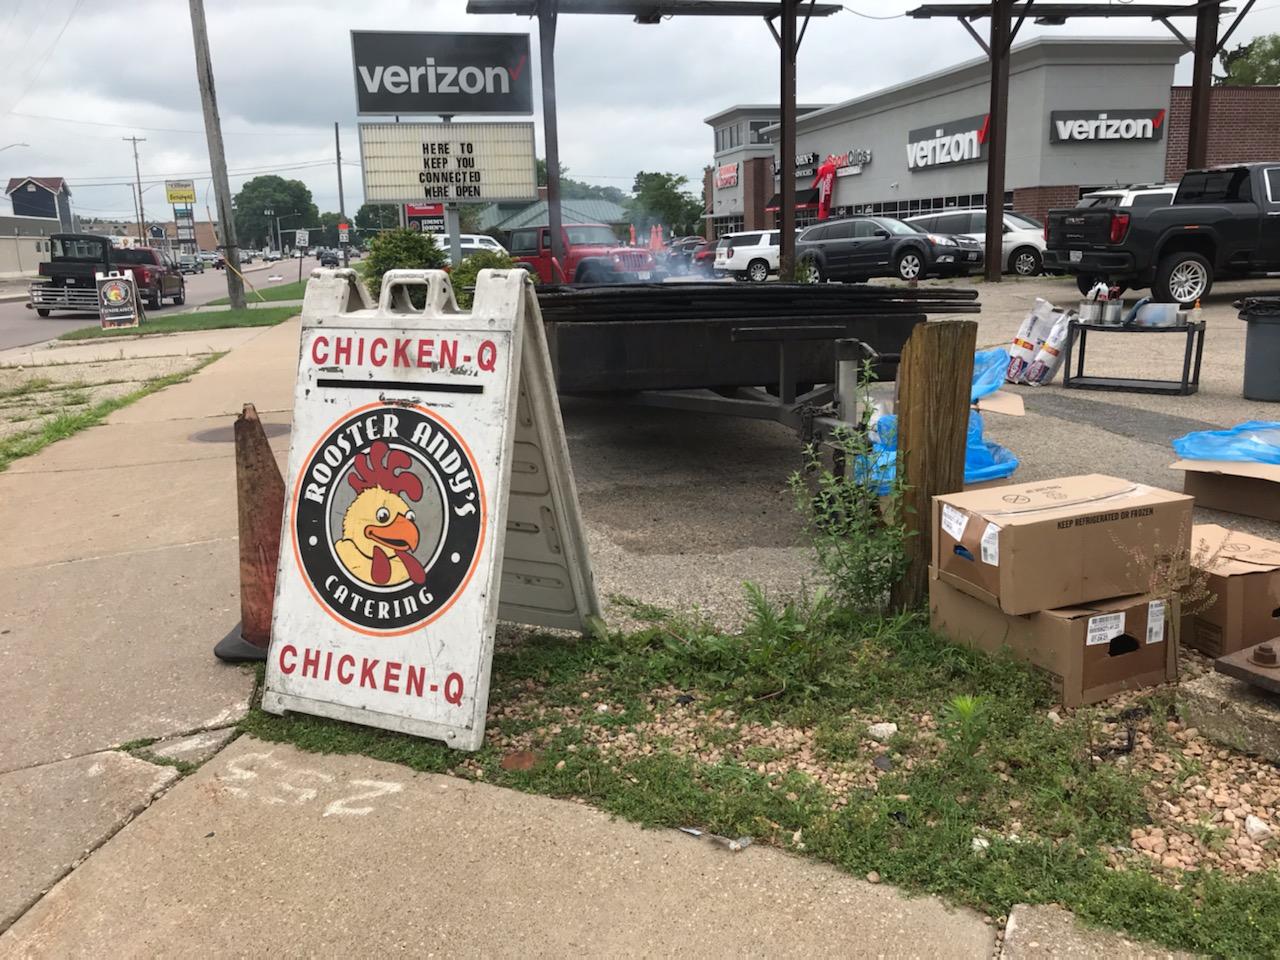 A typical set up advertising a Chicken Q event. It's the scent of grilled chicken that helps bring customers in